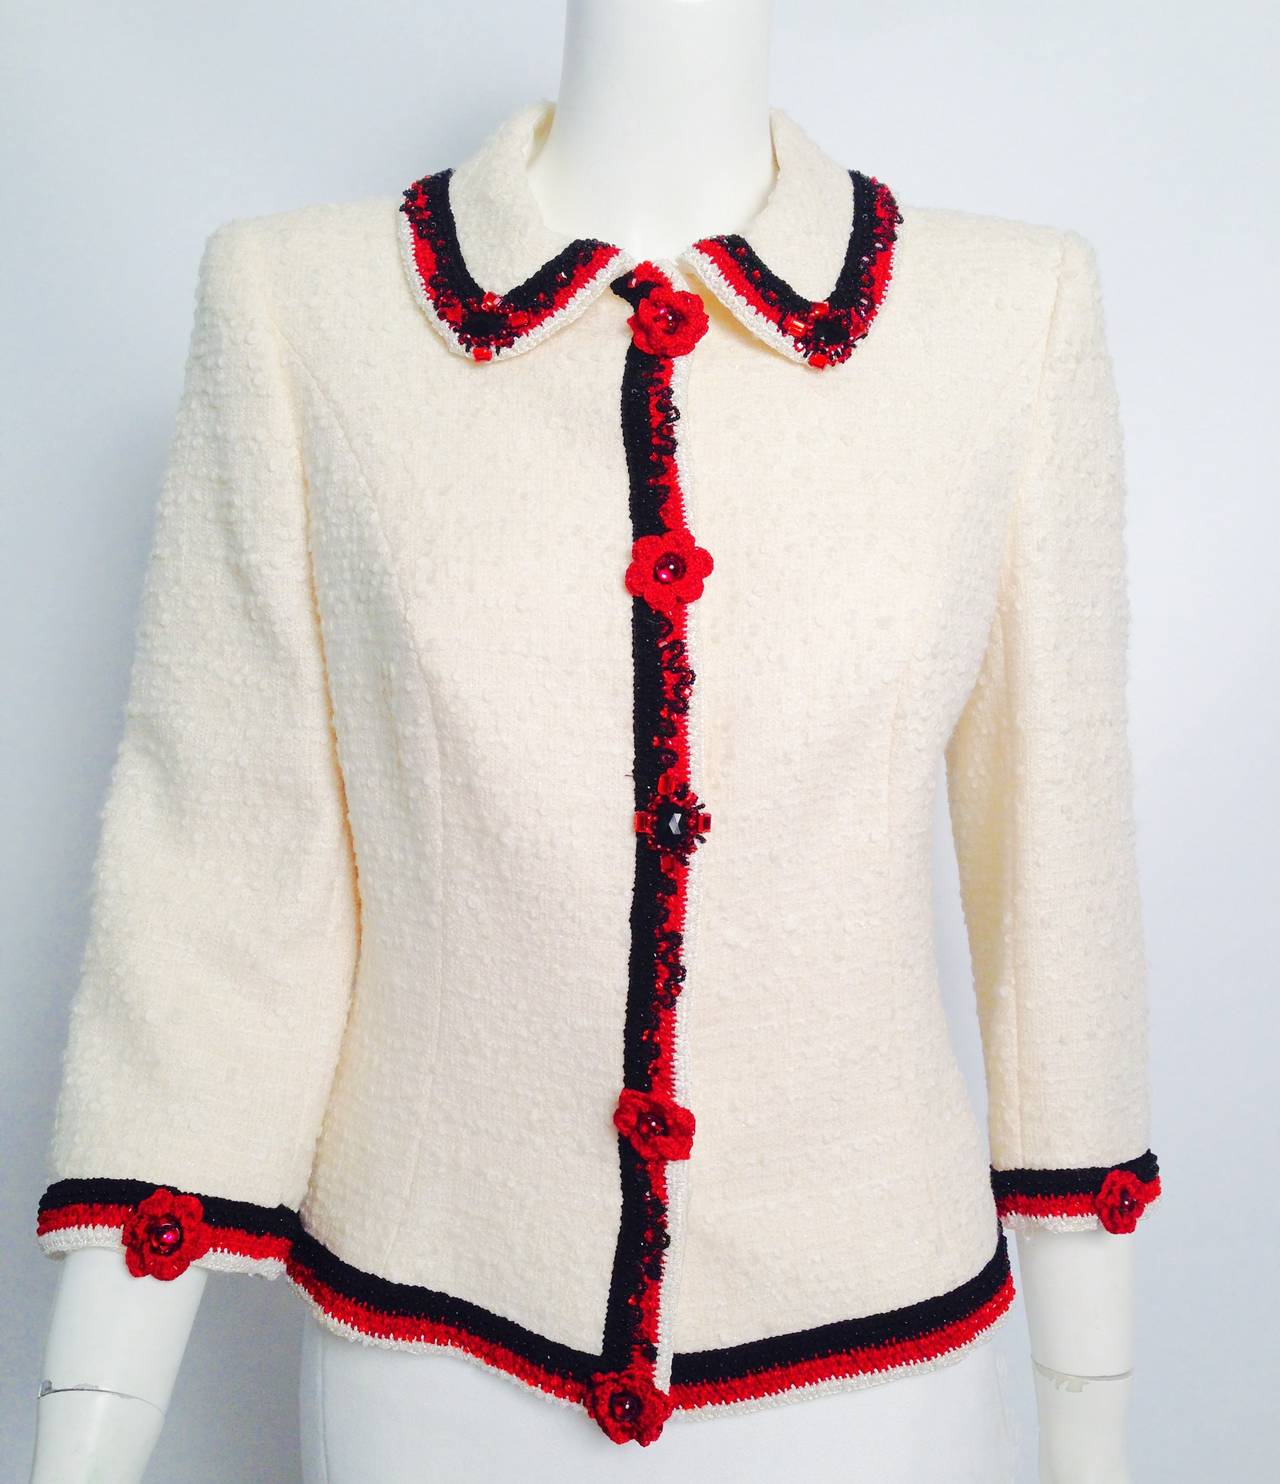 Take time to smell the roses in this Exquisite Escada Embroidered Tweed Jacket!  Brand new with manufacturer and Saks Fifth Avenue tags, jacket is crafted from an elevated wool blend that yields the characteristic  